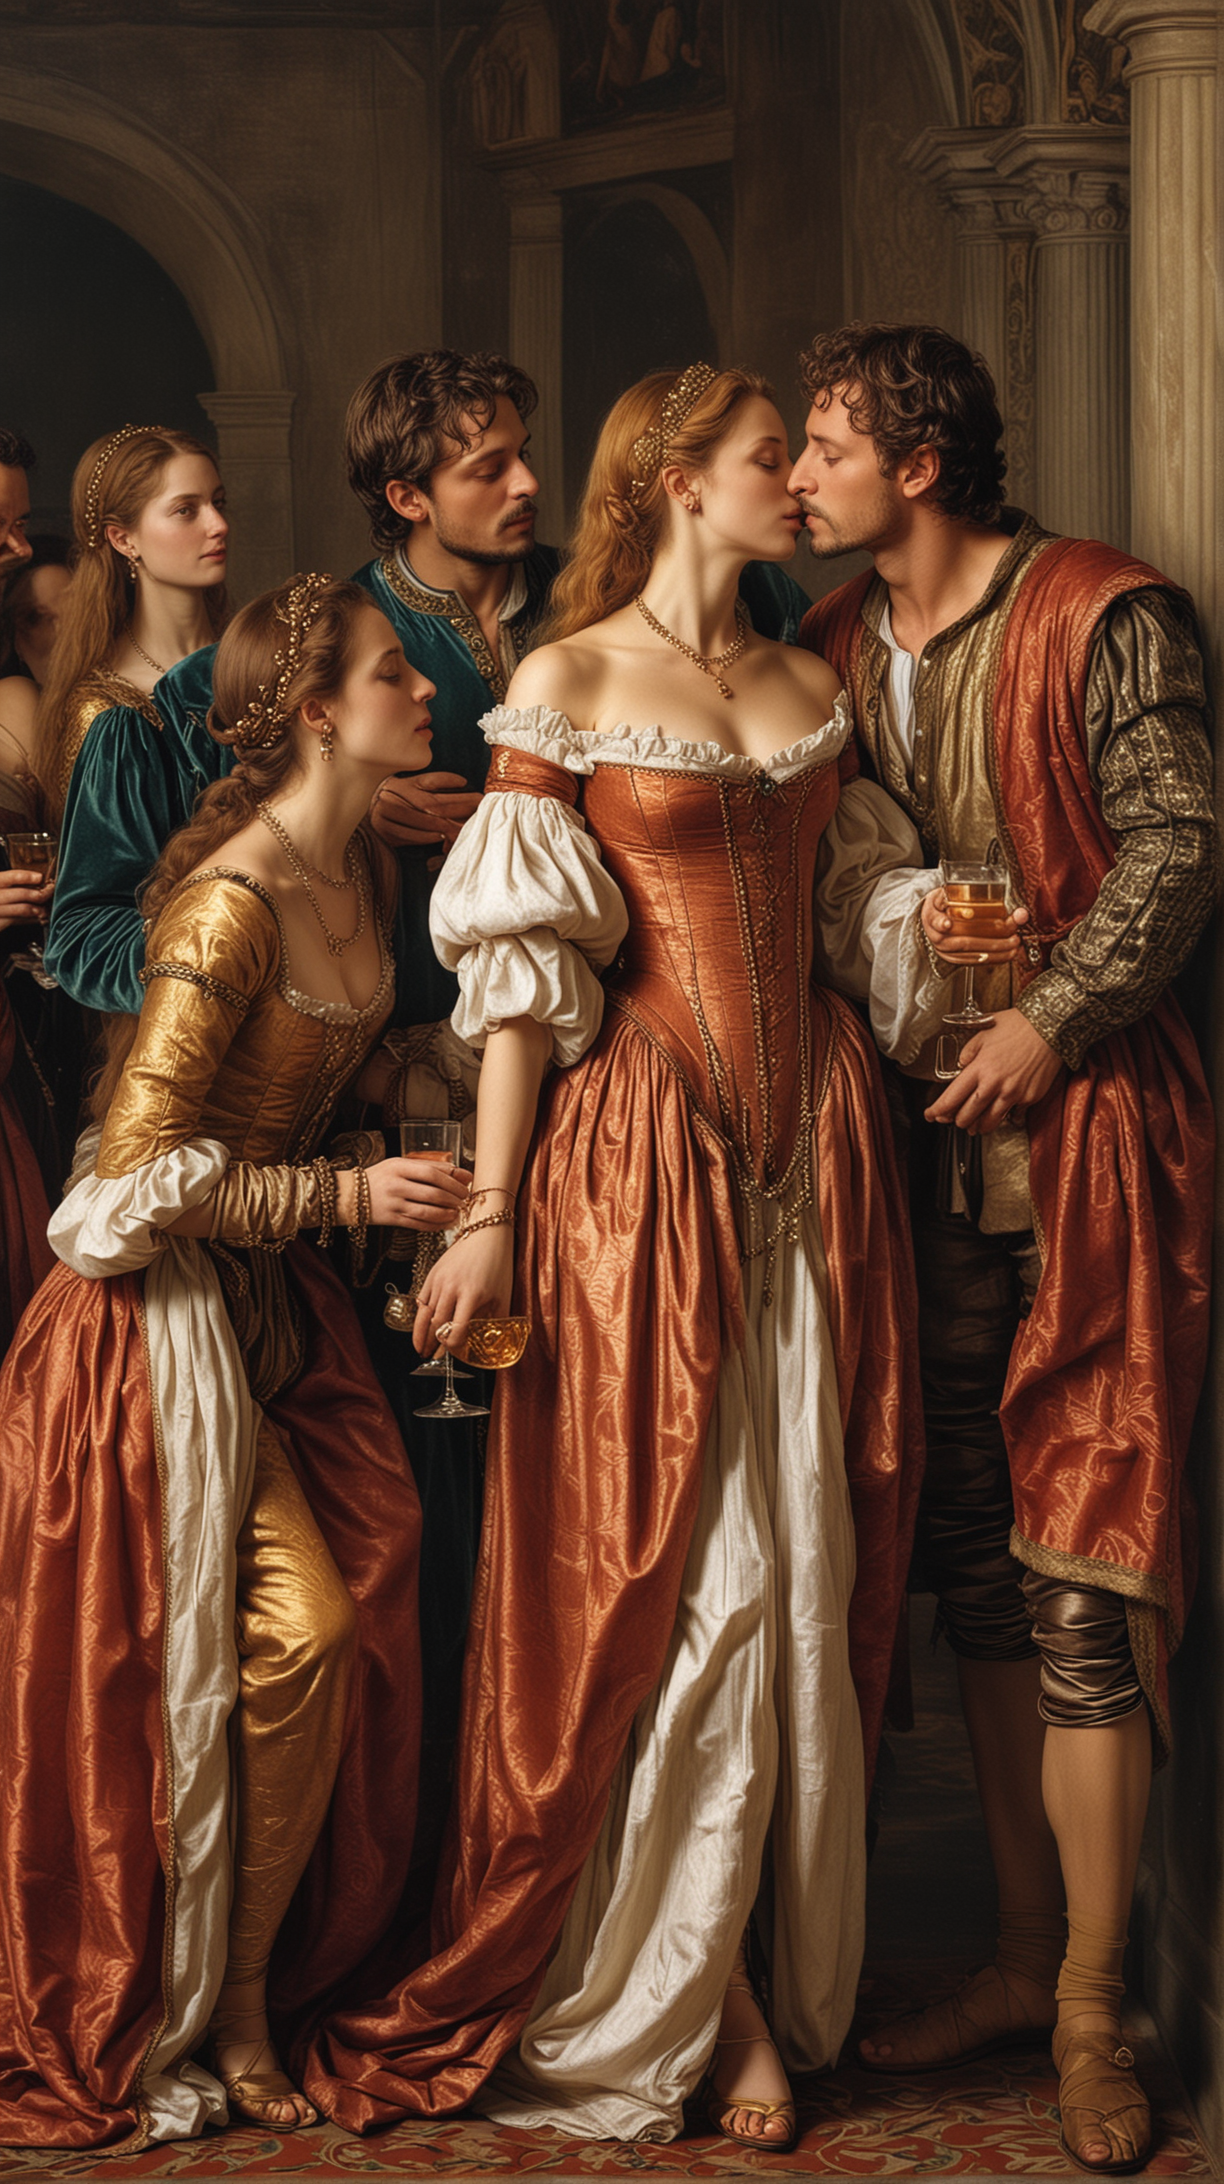 in Renaissance time Borgia family in lavish parties, drinking, kissing in half cloths.